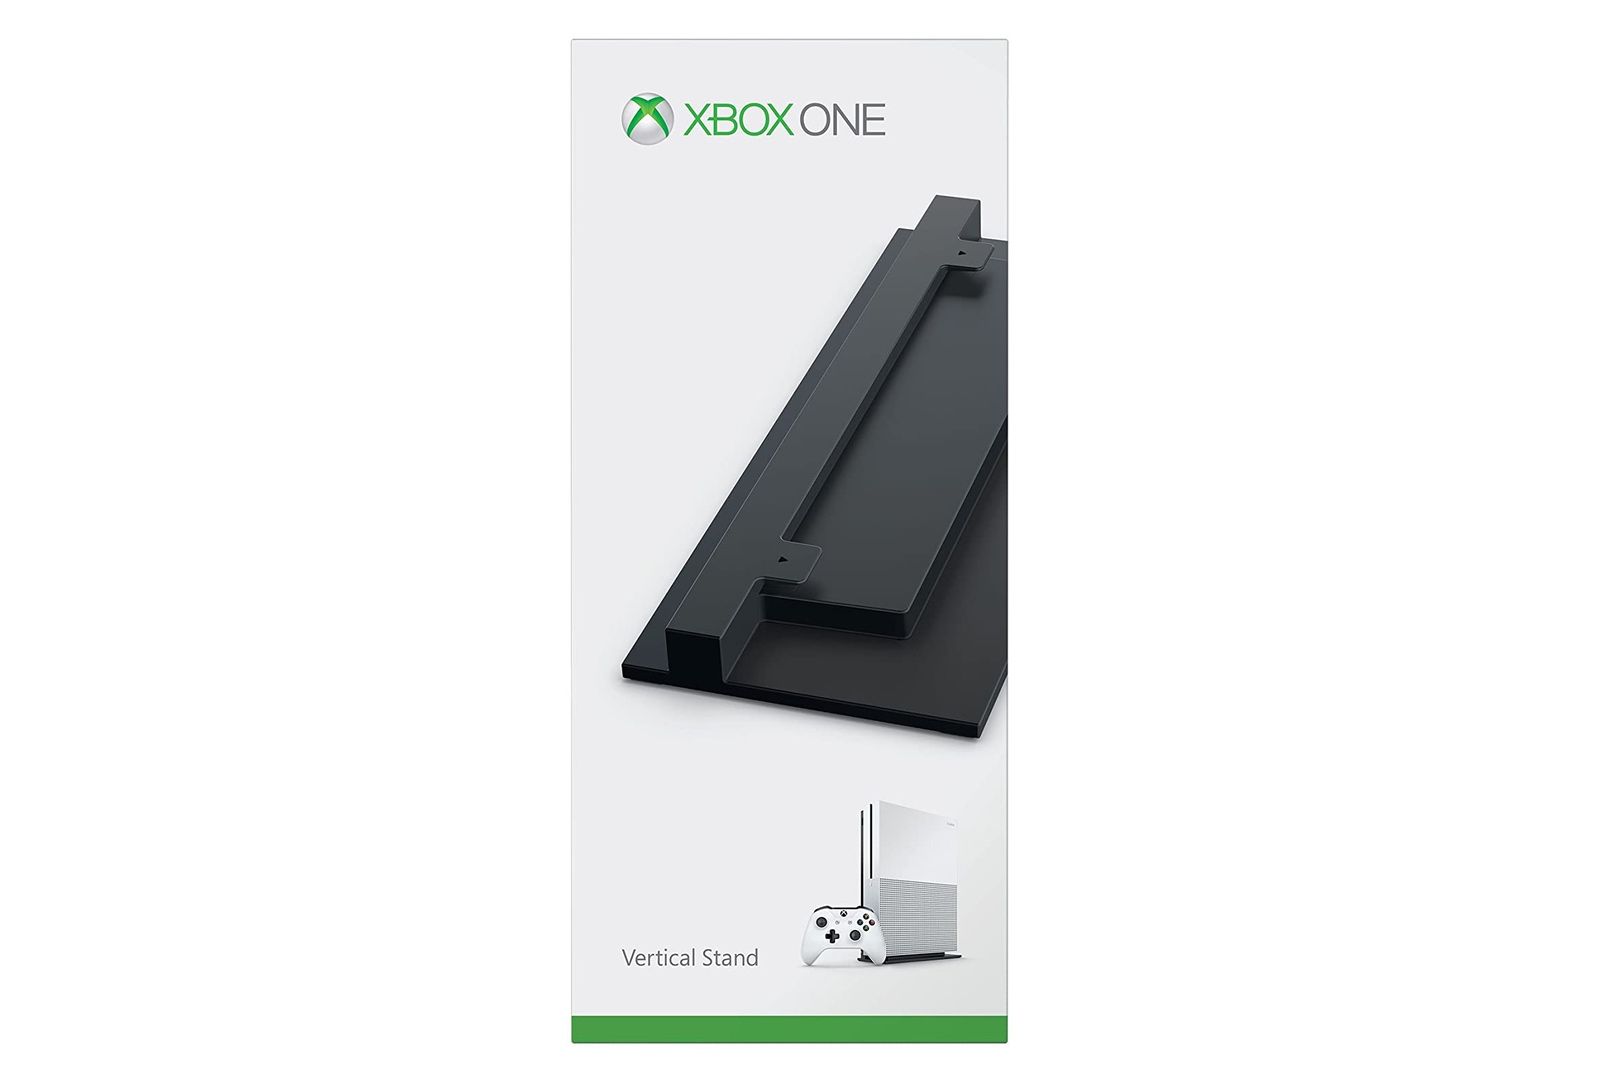 Best Xbox One accessories 2020: Upgrade your Xbox experience with these handy gadgets photo 4